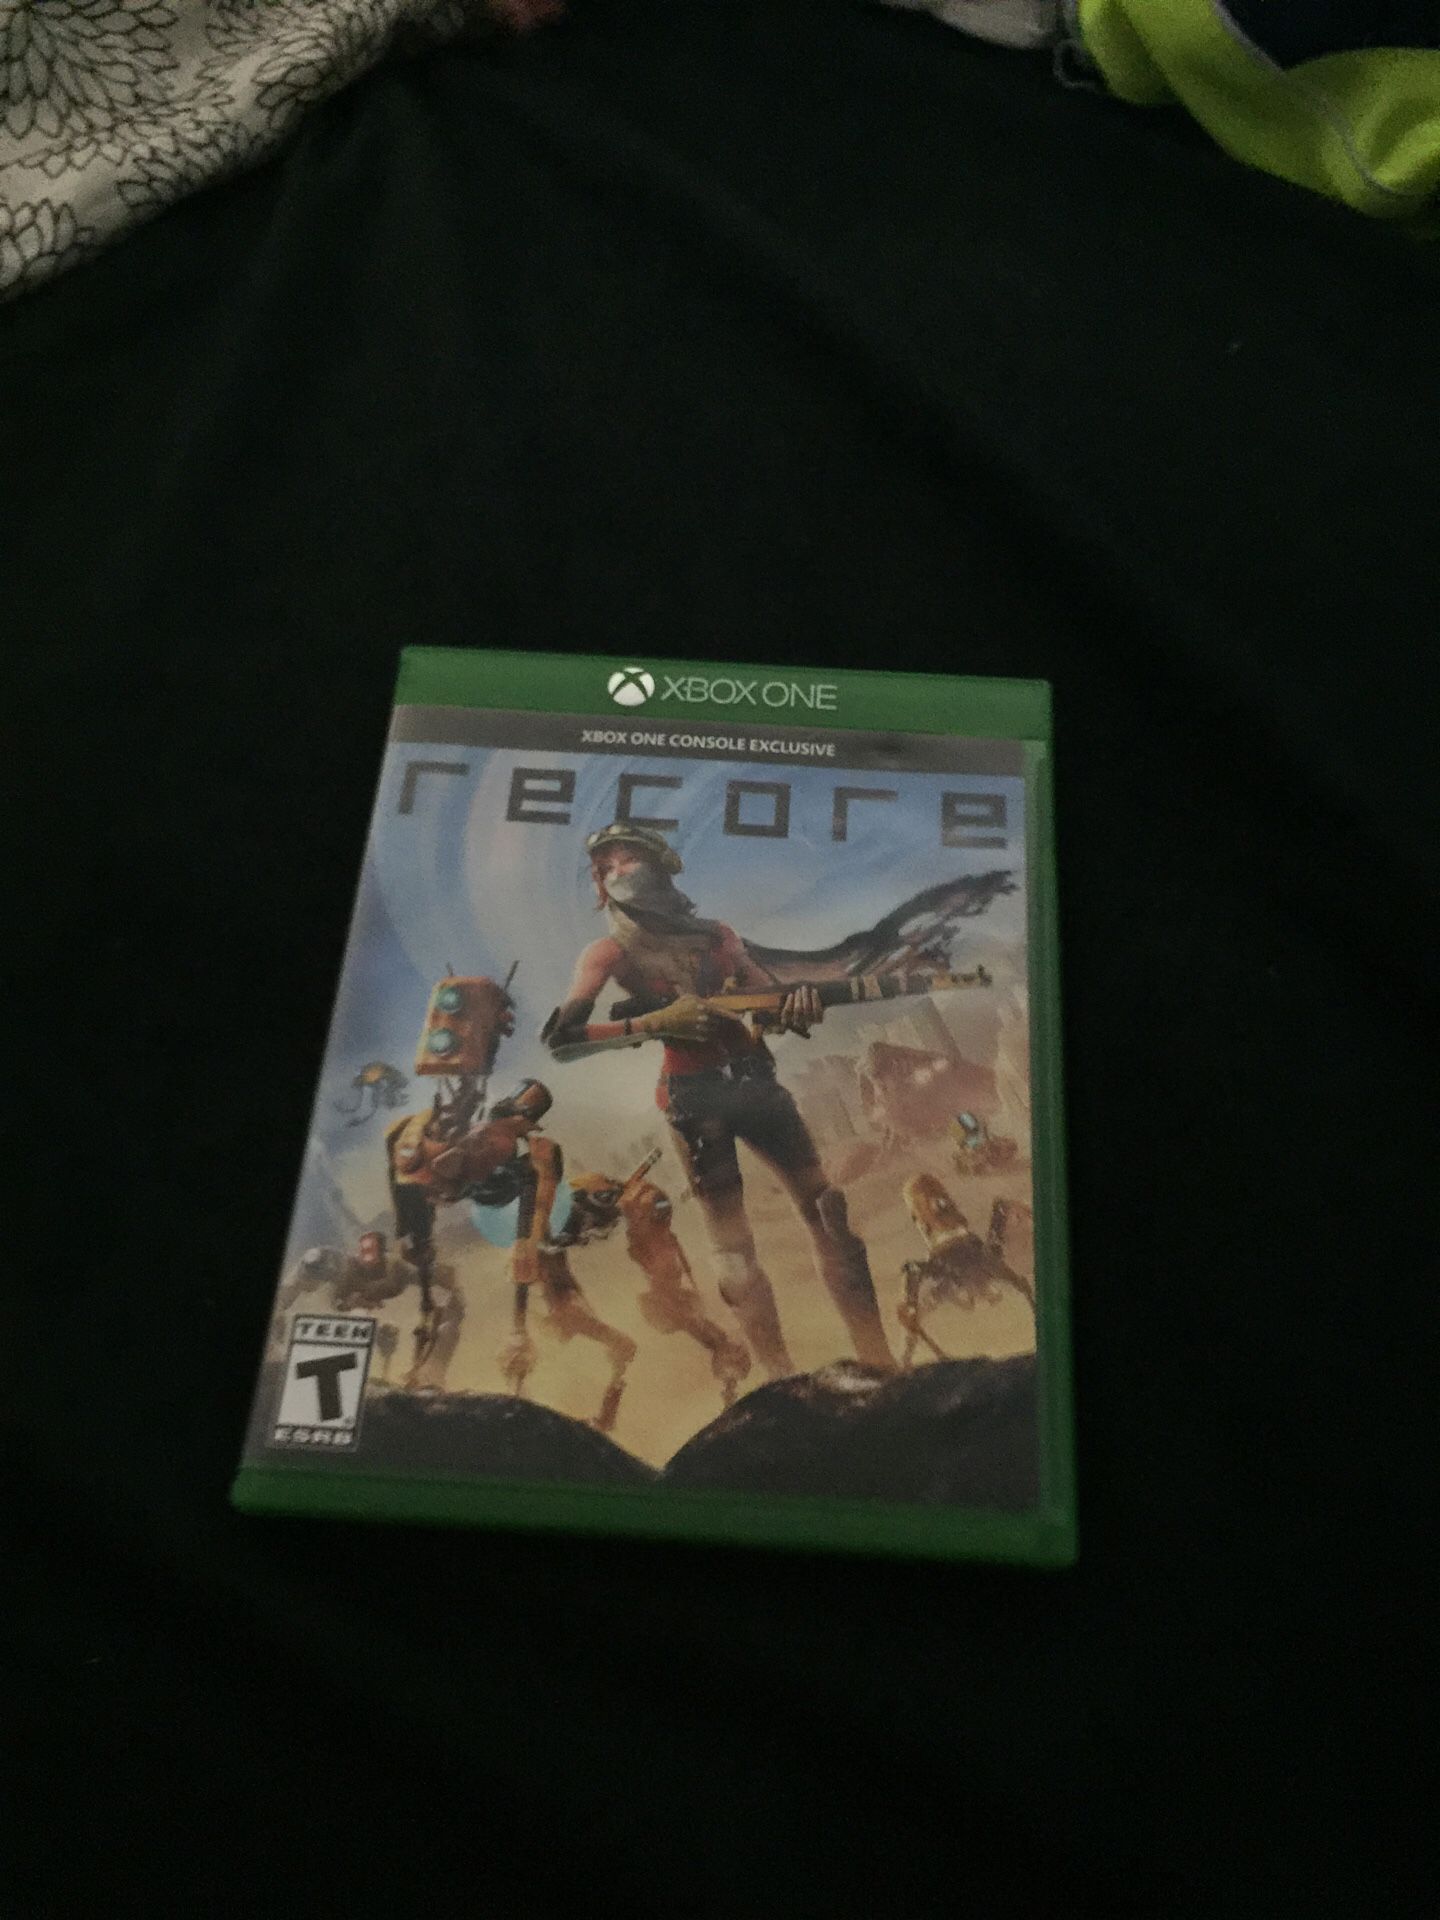 Xbox one Recore game